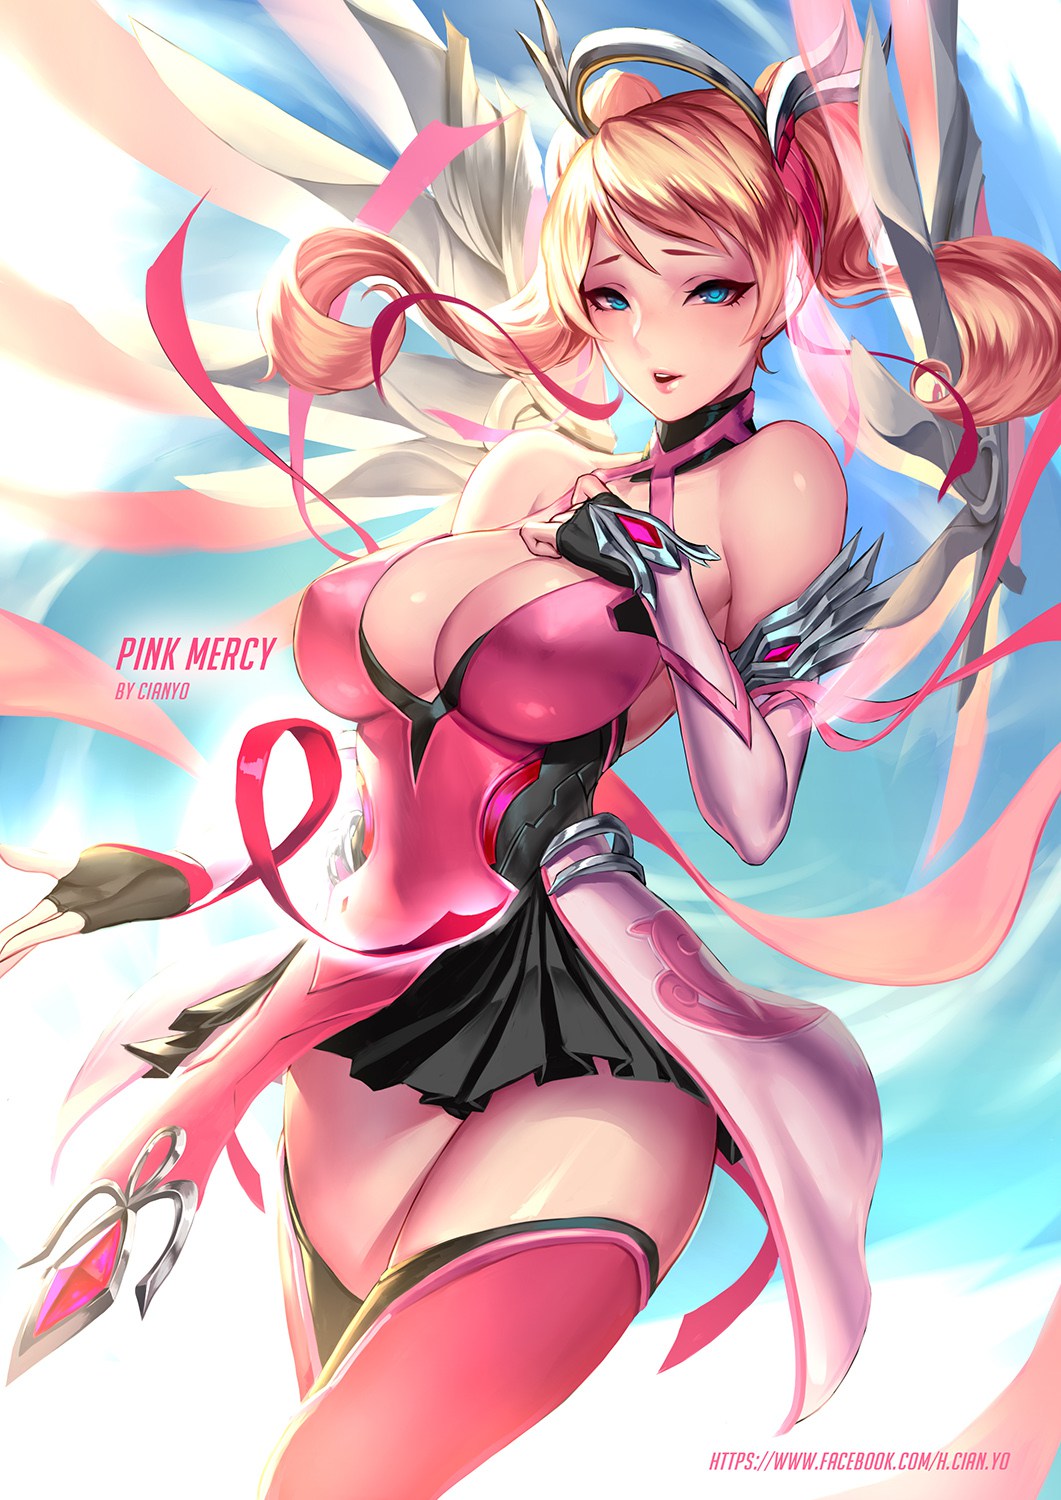 __mercy_and_pink_mercy_overwatch_drawn_by_cian_yo__f1583969c43e50513fb7561e550c967c